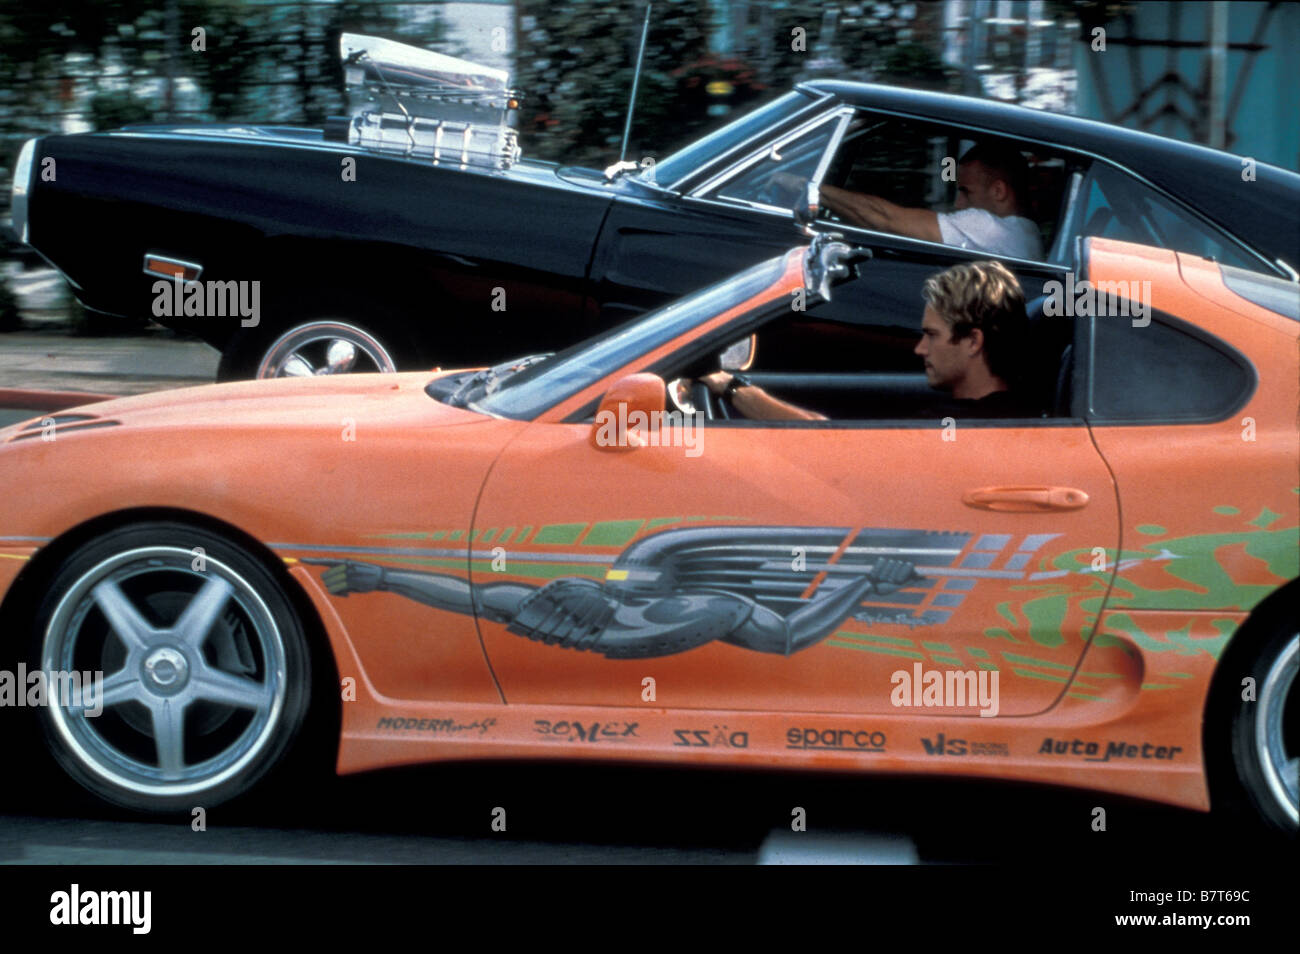 The Fast and the Furious  Year: 2001 USA Vin Diesel, Paul Walker  Director: Rob Cohen Stock Photo